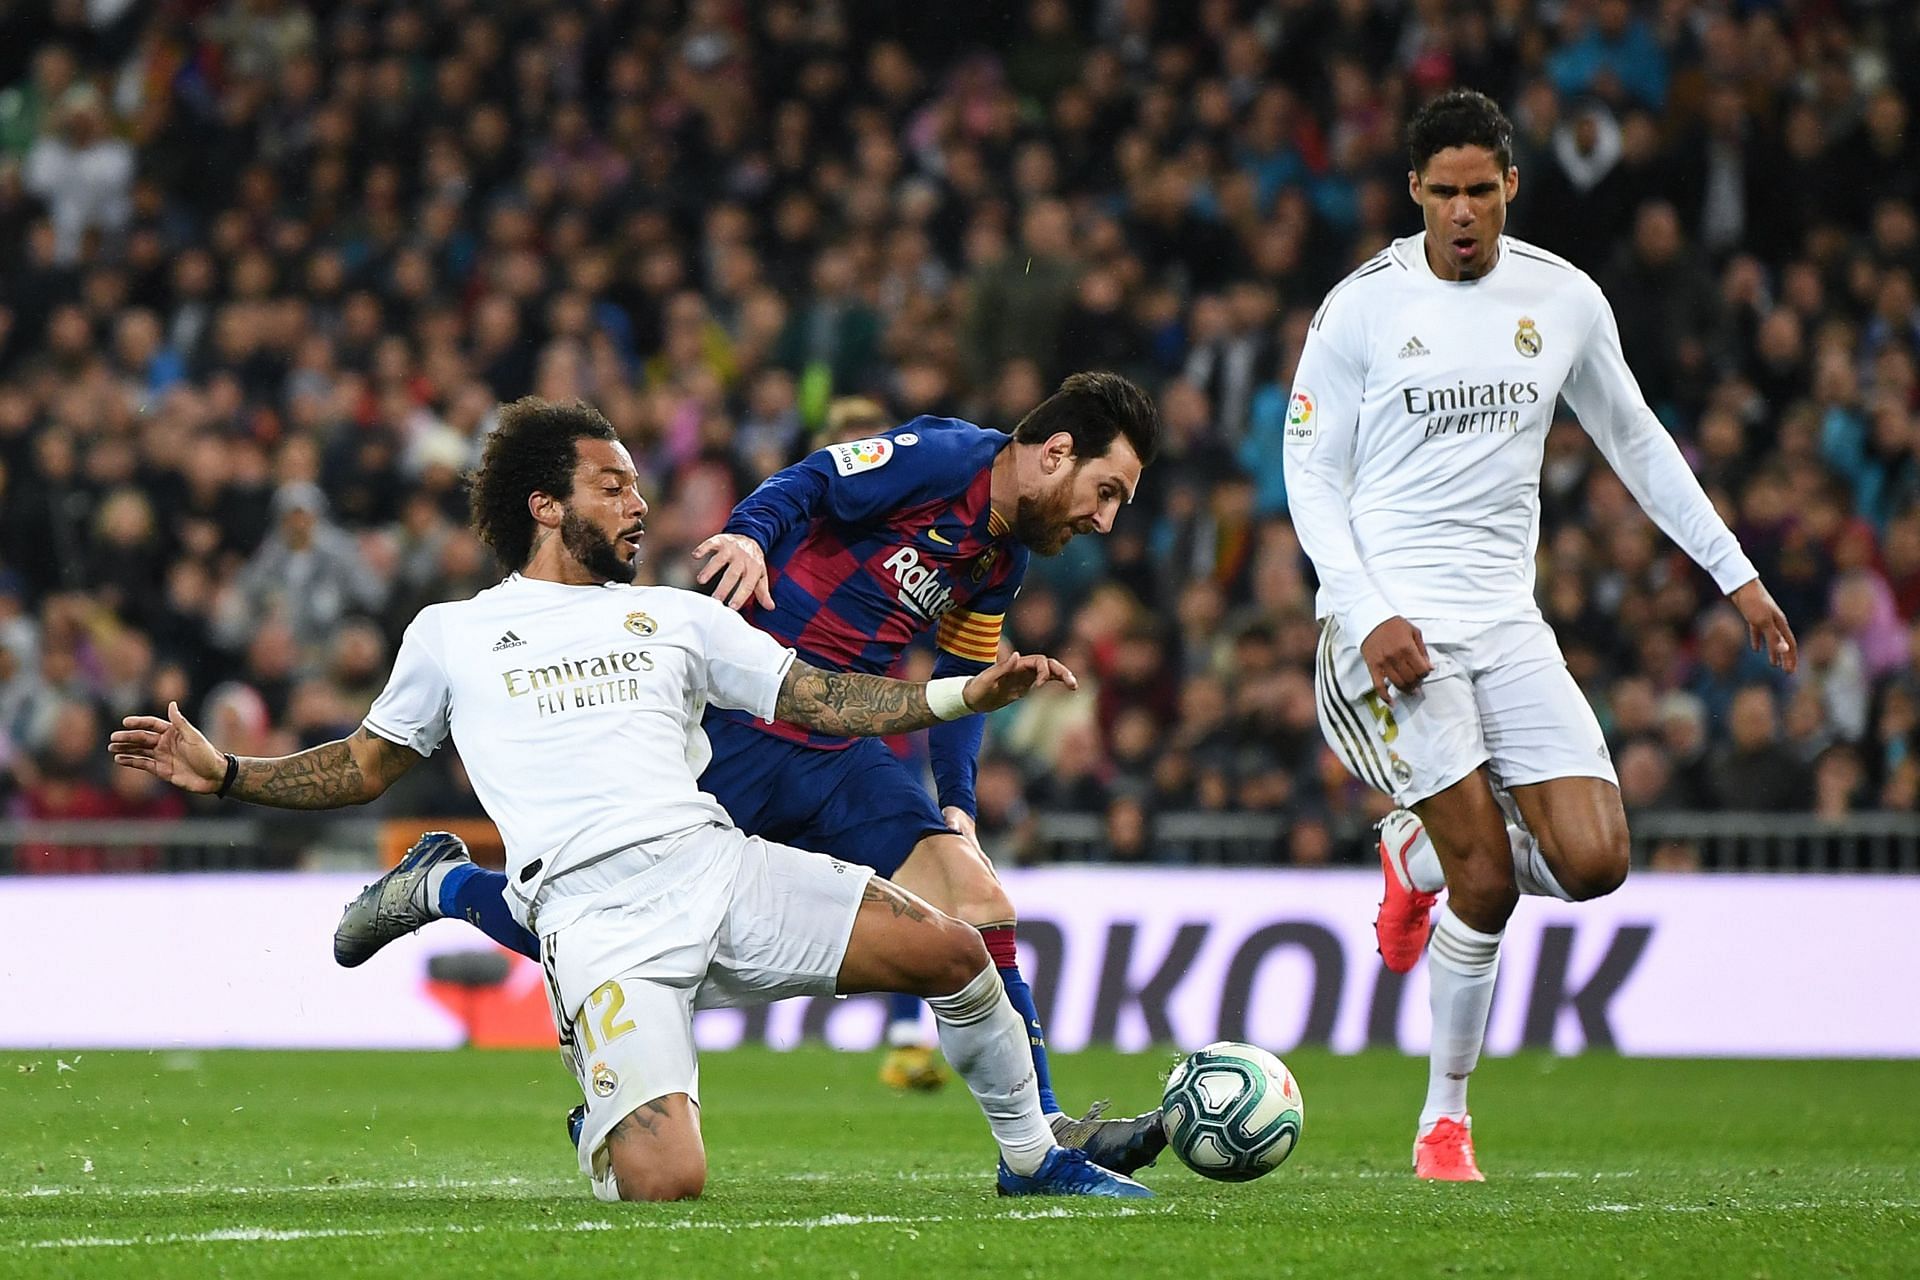 Marcelo went toe-to-toe with Lionel Messi in El Clasico.